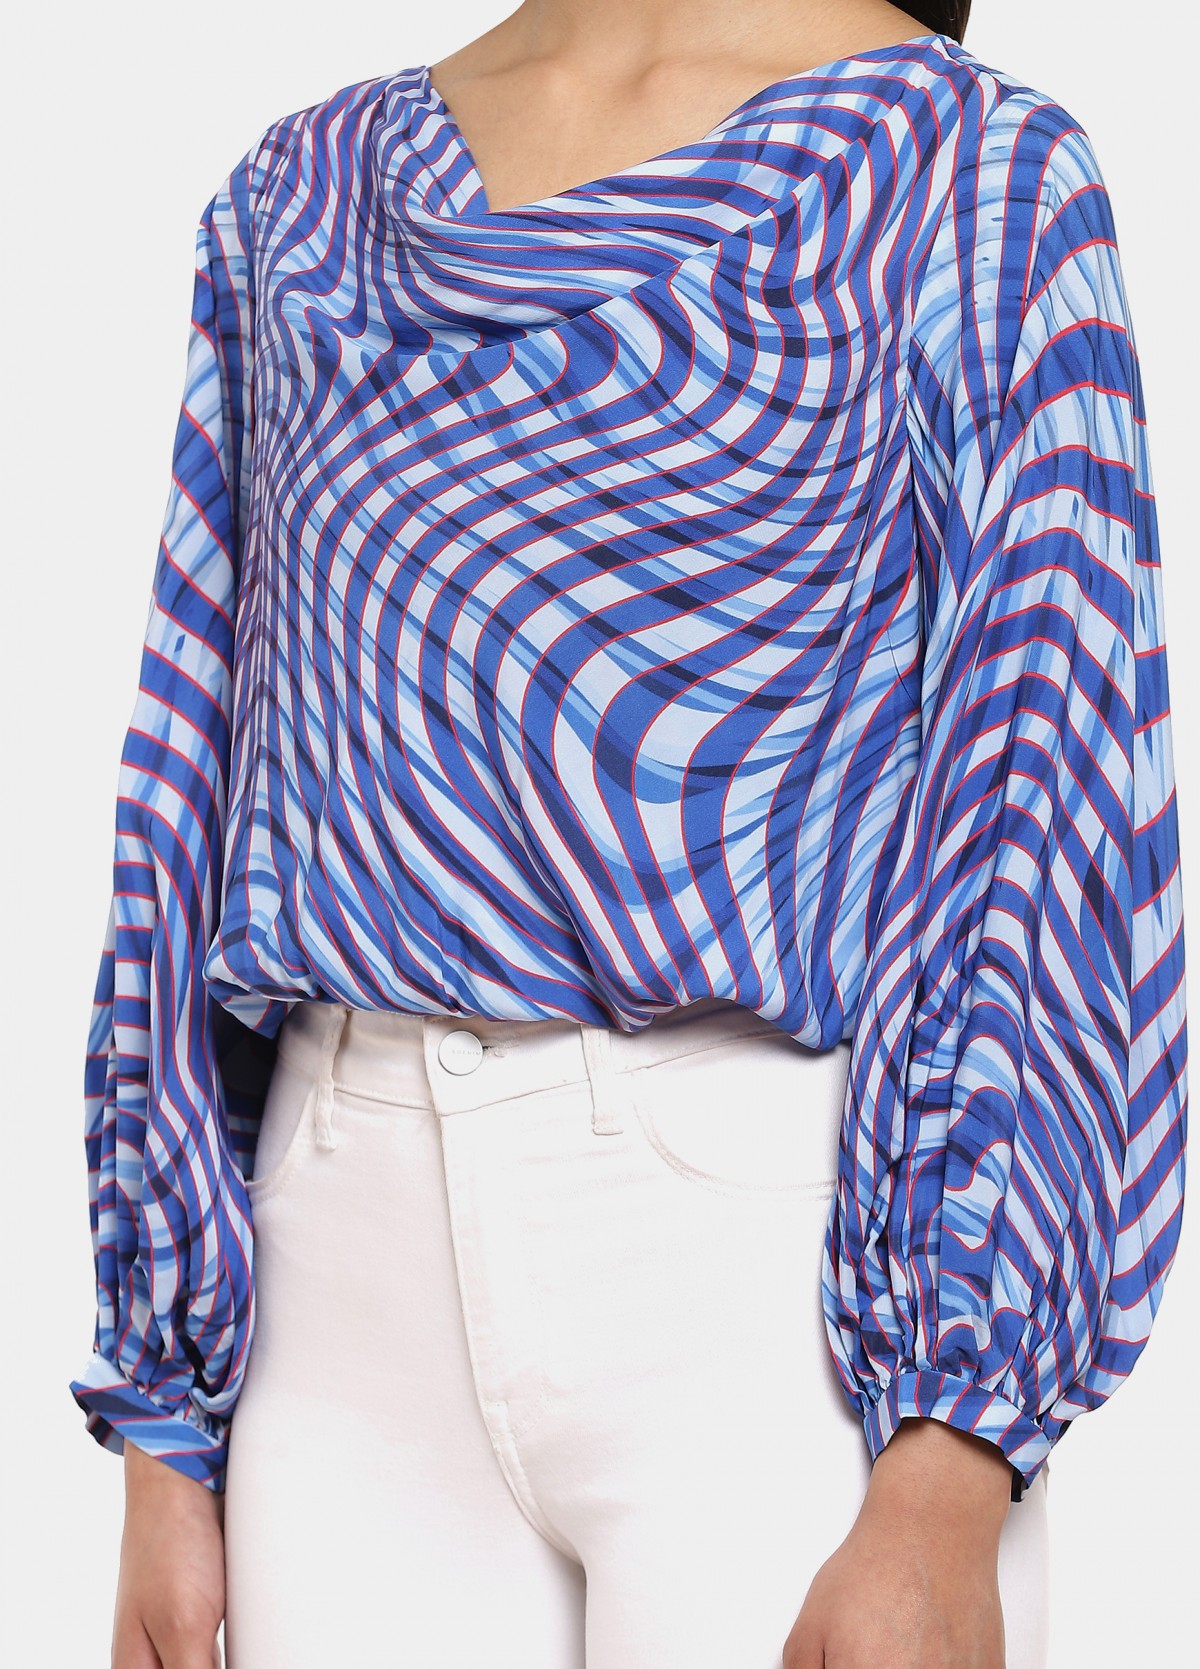 The Moody Blues Top